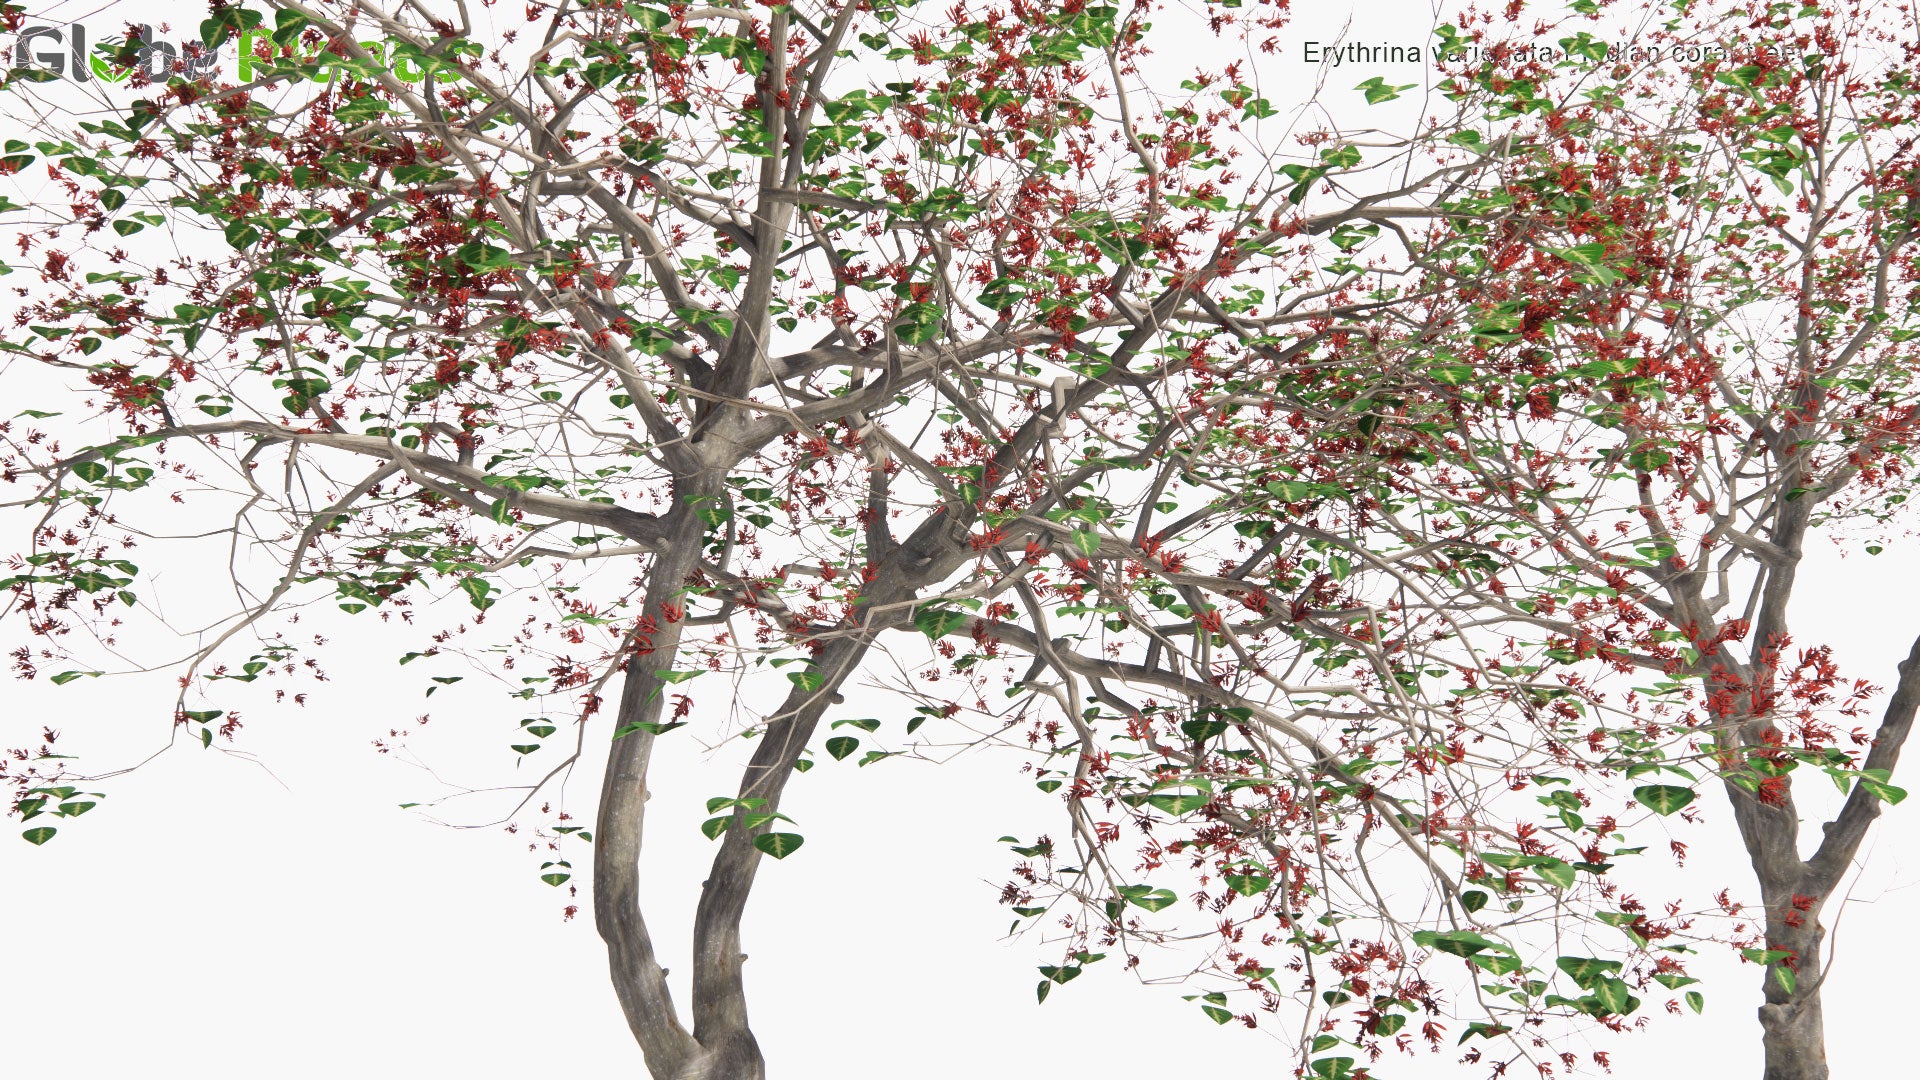 Low Poly Erythrina Variegata - Indian Coral Tree, Tiger's Claw (3D Model)